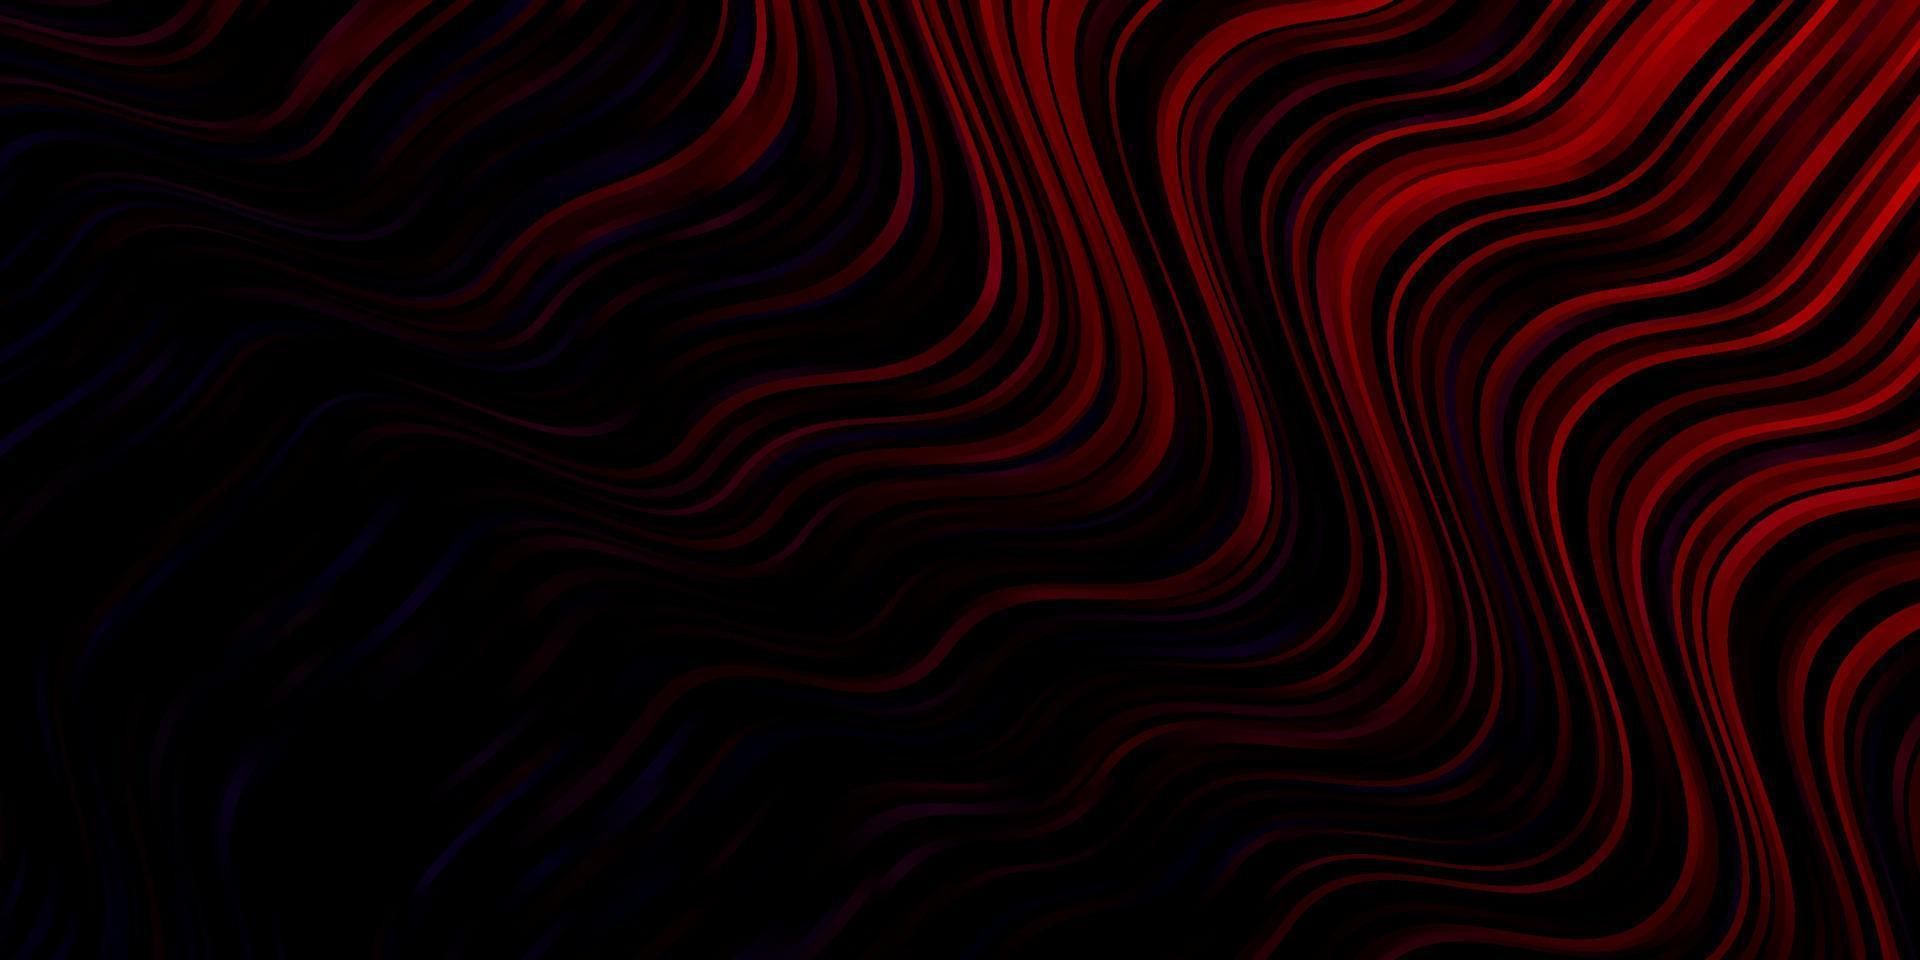 Dark Blue, Red vector texture with wry lines.